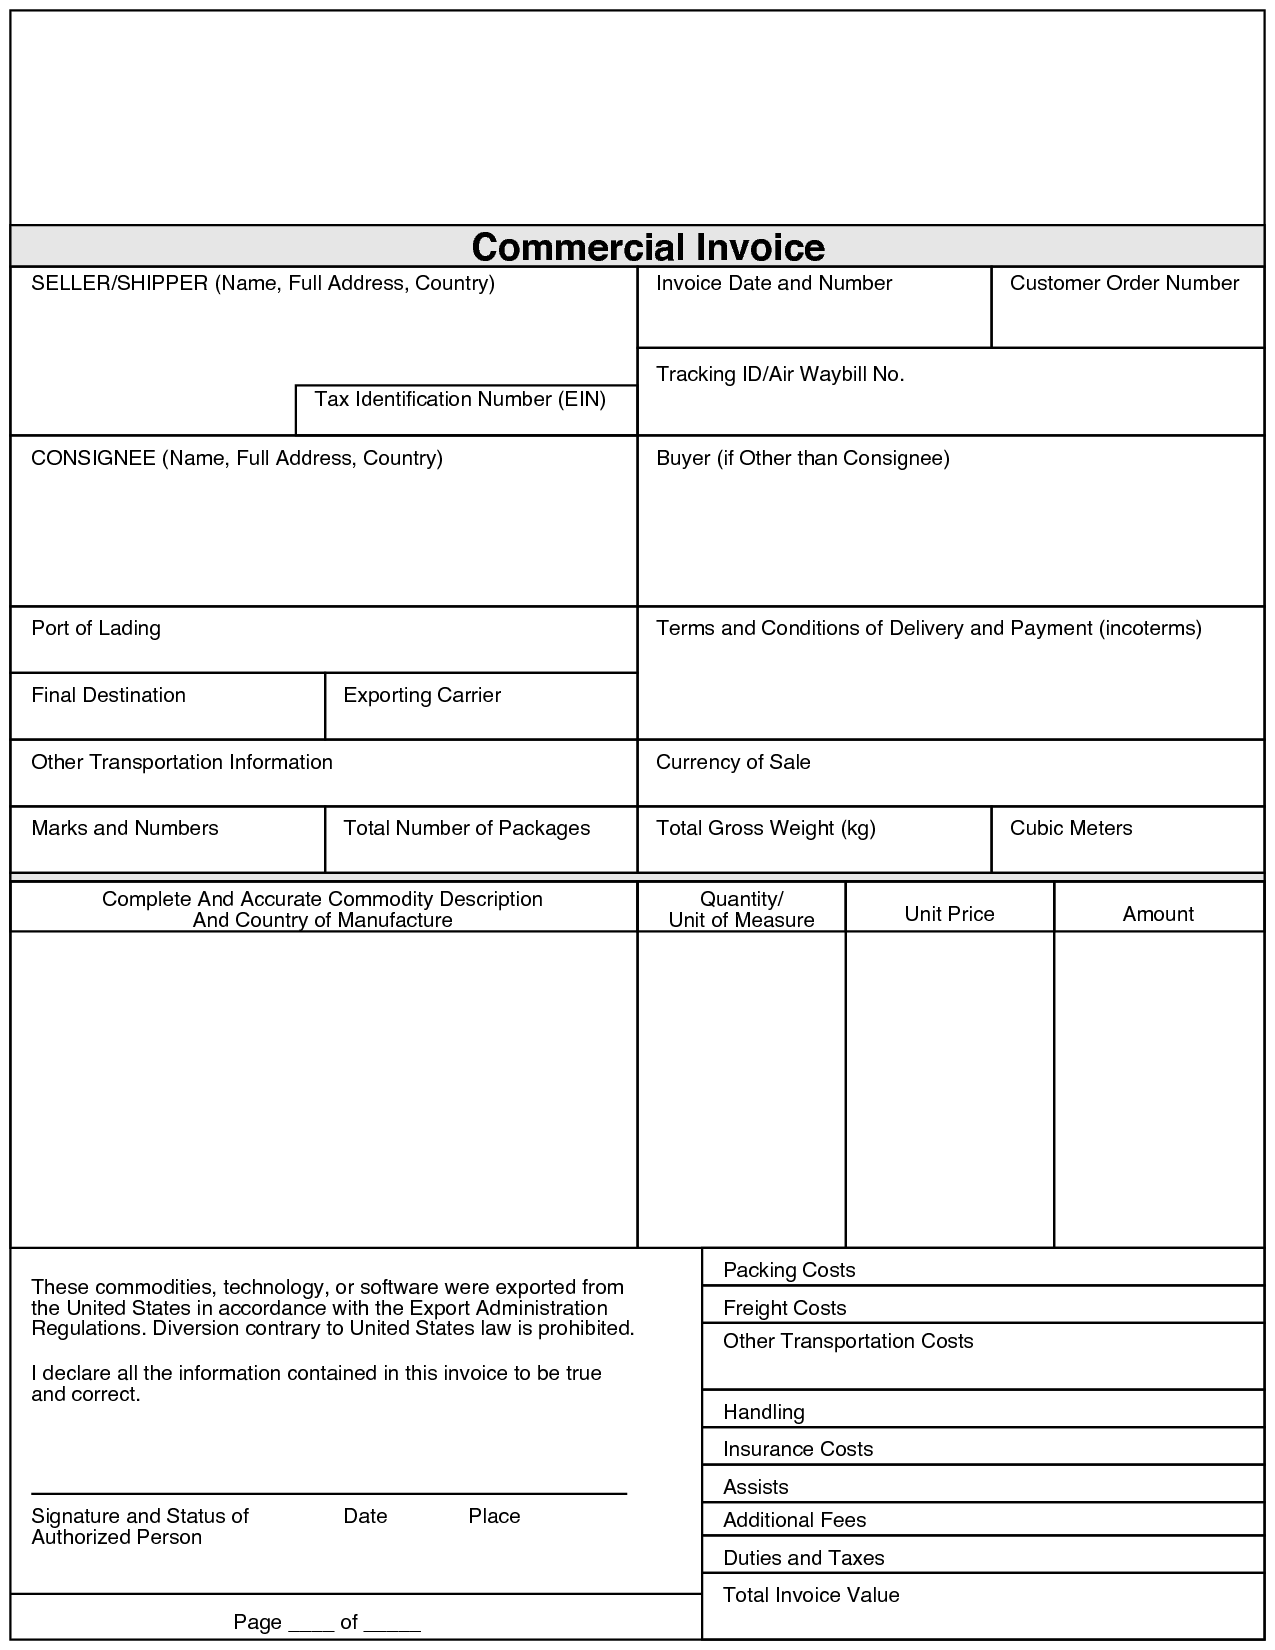 Fedex Commercial Invoice | printable invoice template